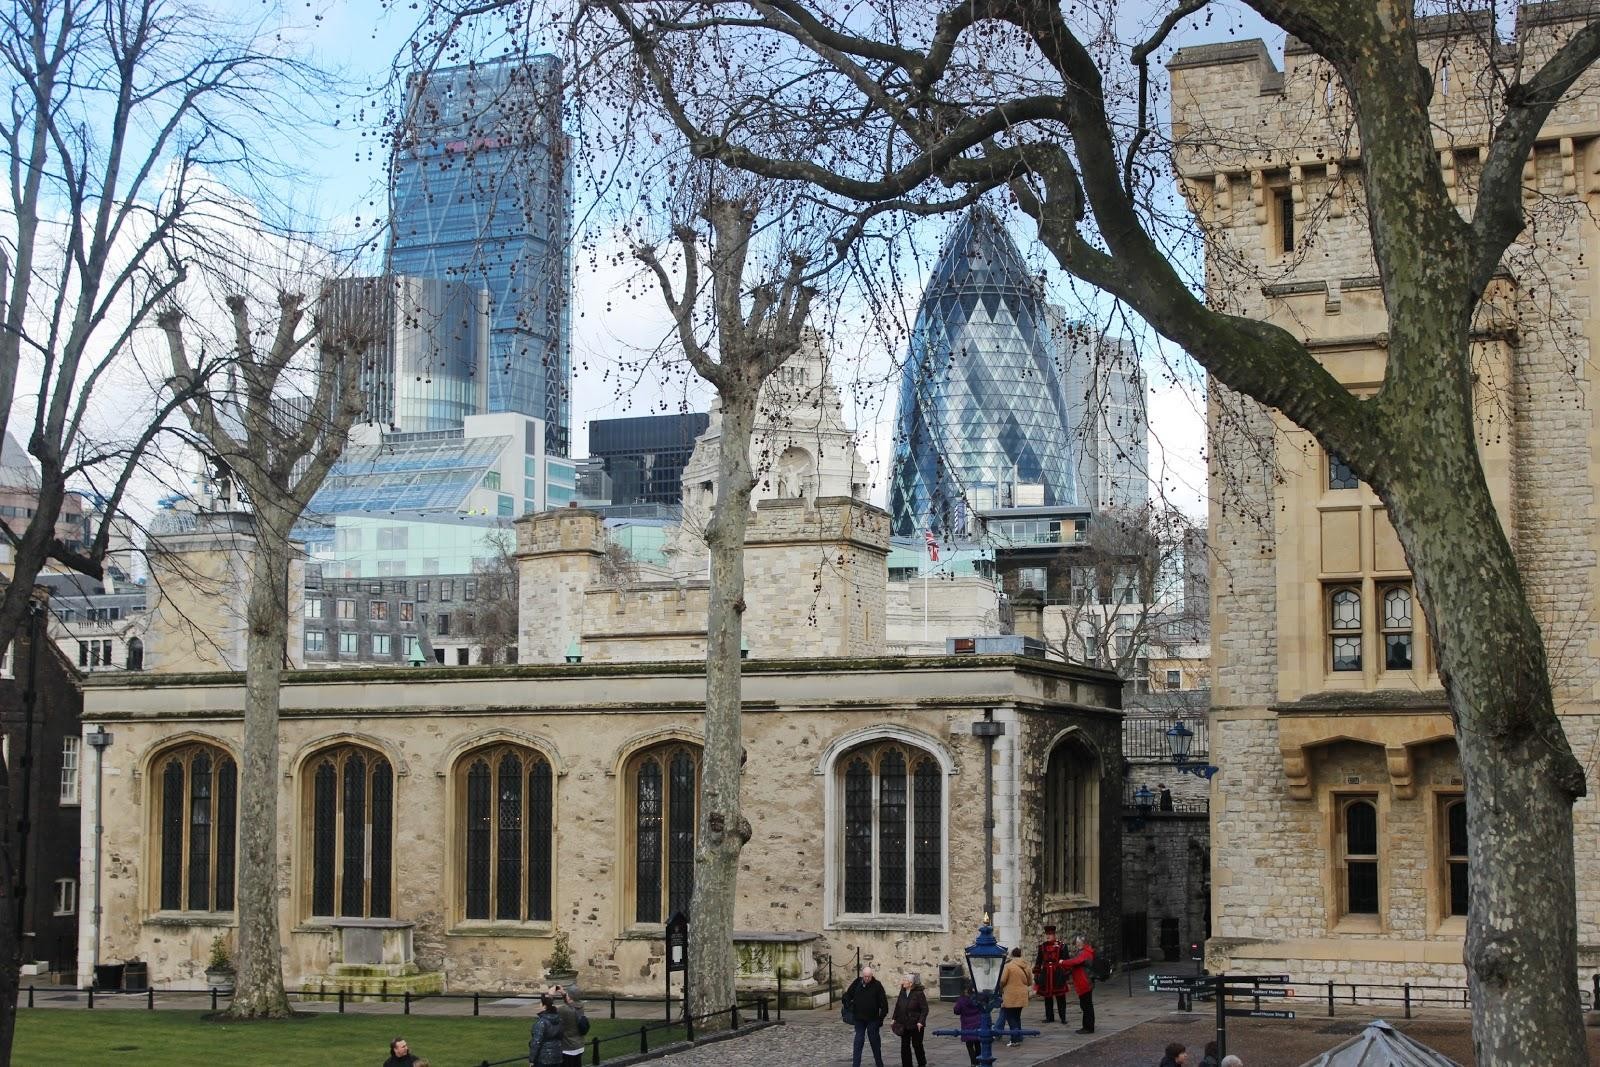 The Tower of London with Canary Wharf in the background